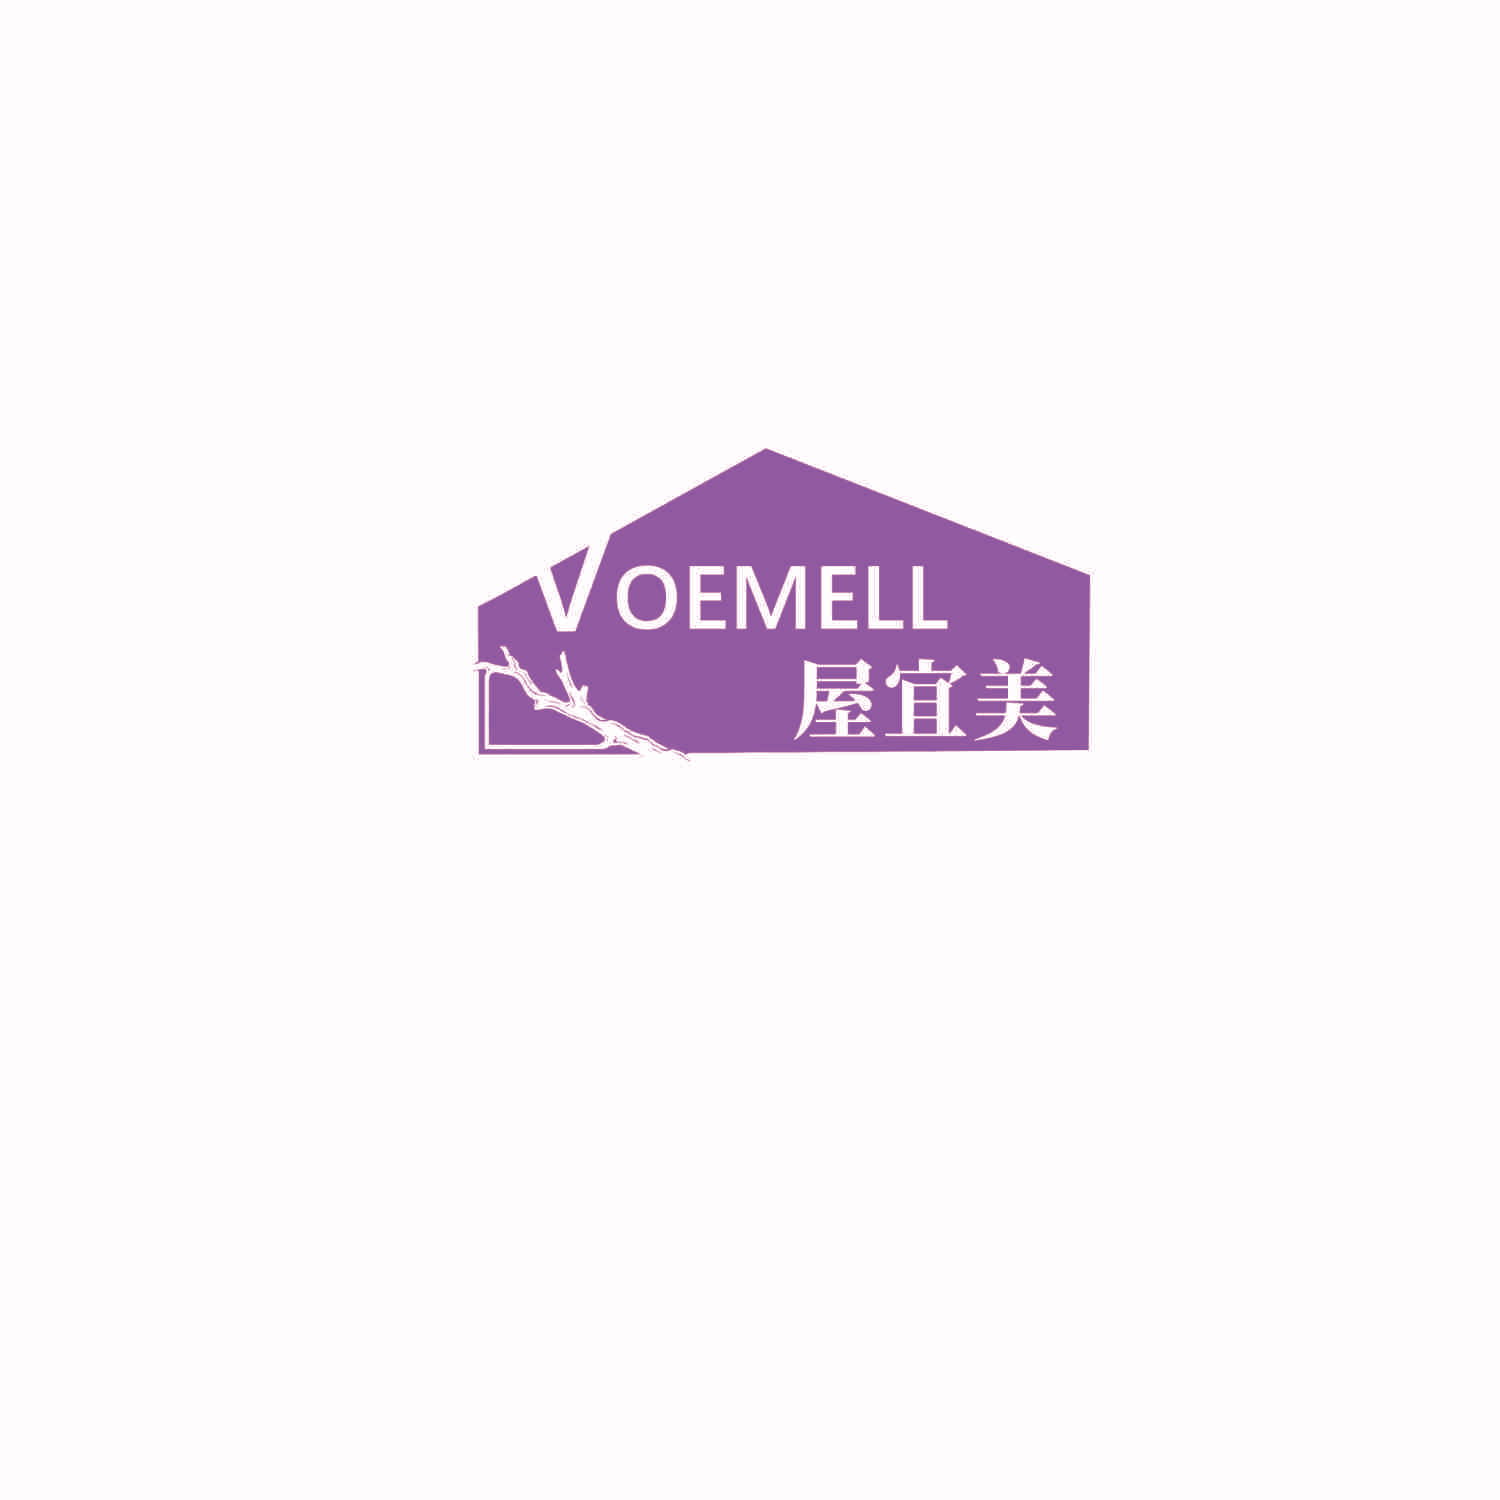 VOEMELL 屋宜美